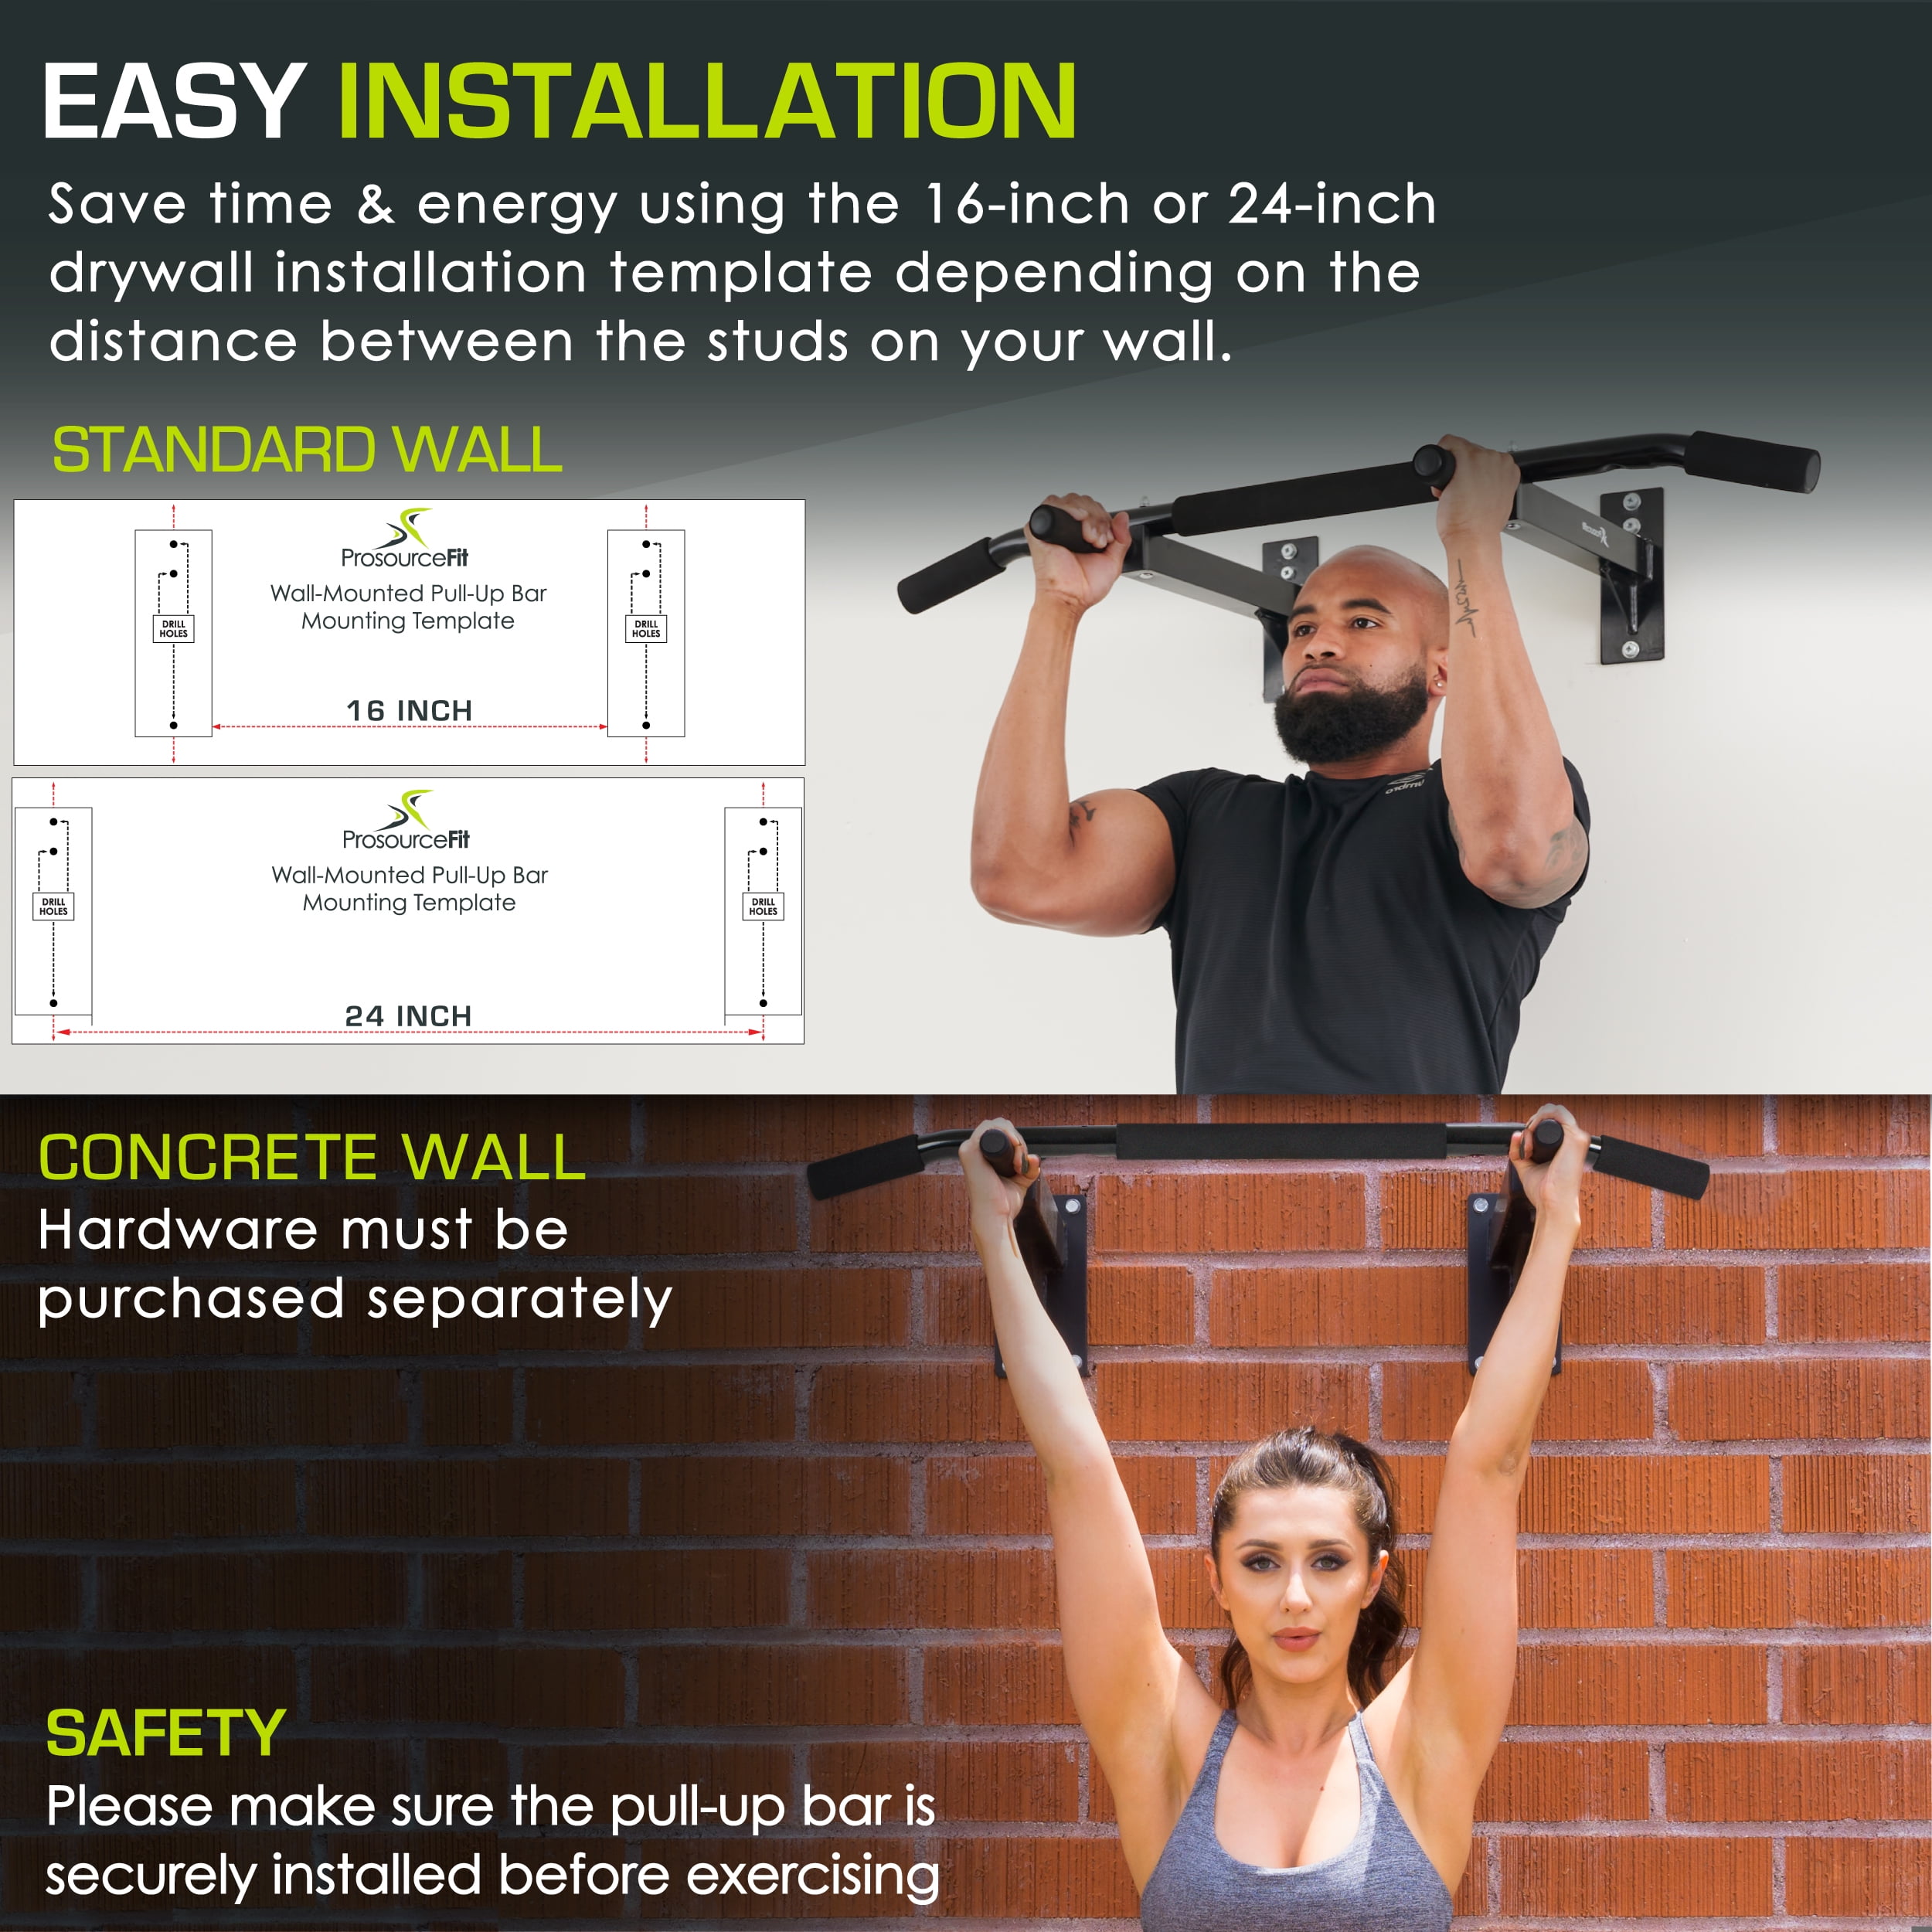 Easy Mount Door Frame Pull Up Bar PUB30 - Fitness Accessories